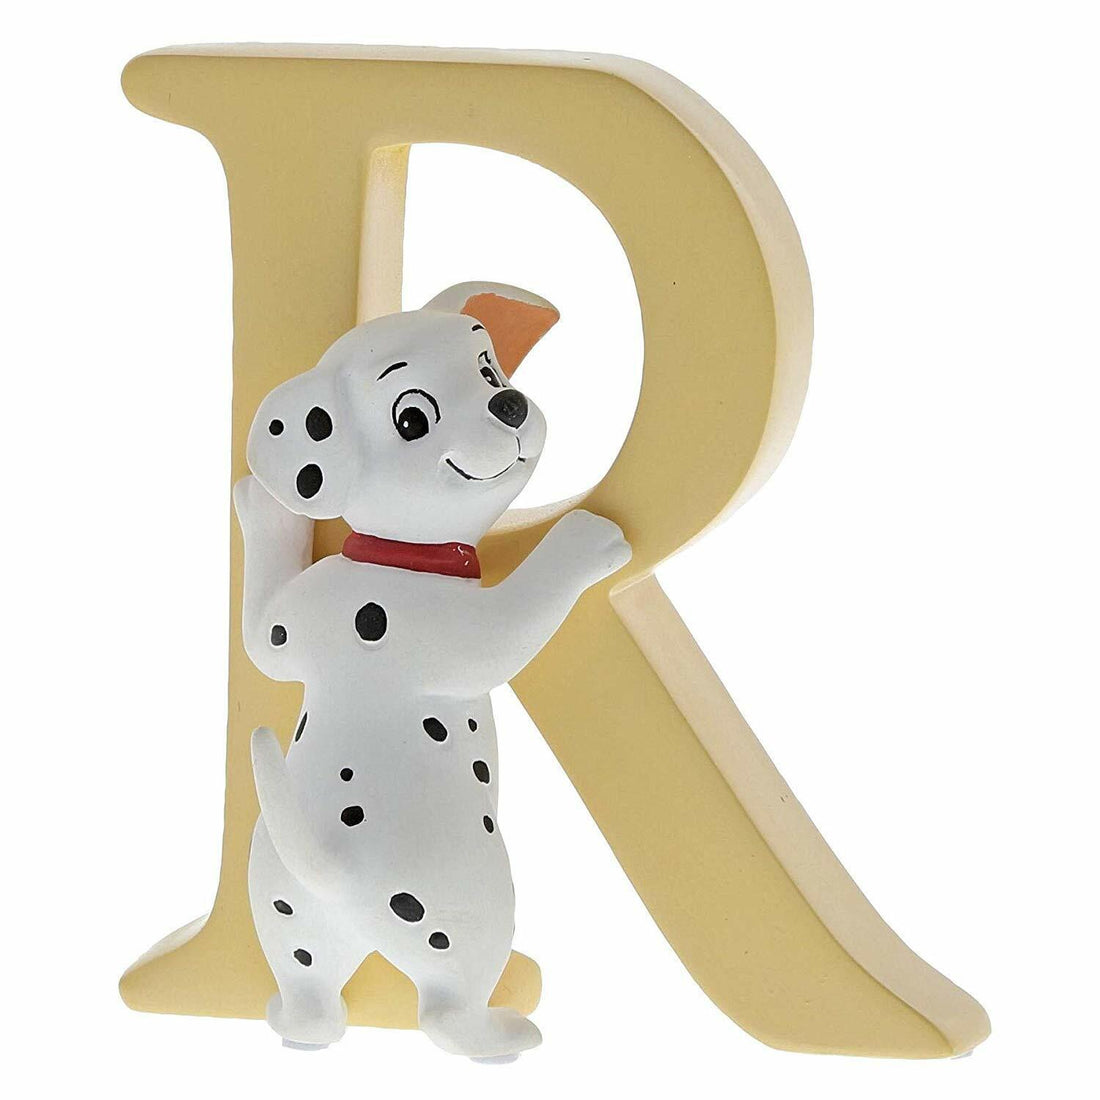 Disney Enchanting Collection Alphabet Letter Figurines - Choose a Letter! - R - Rolly